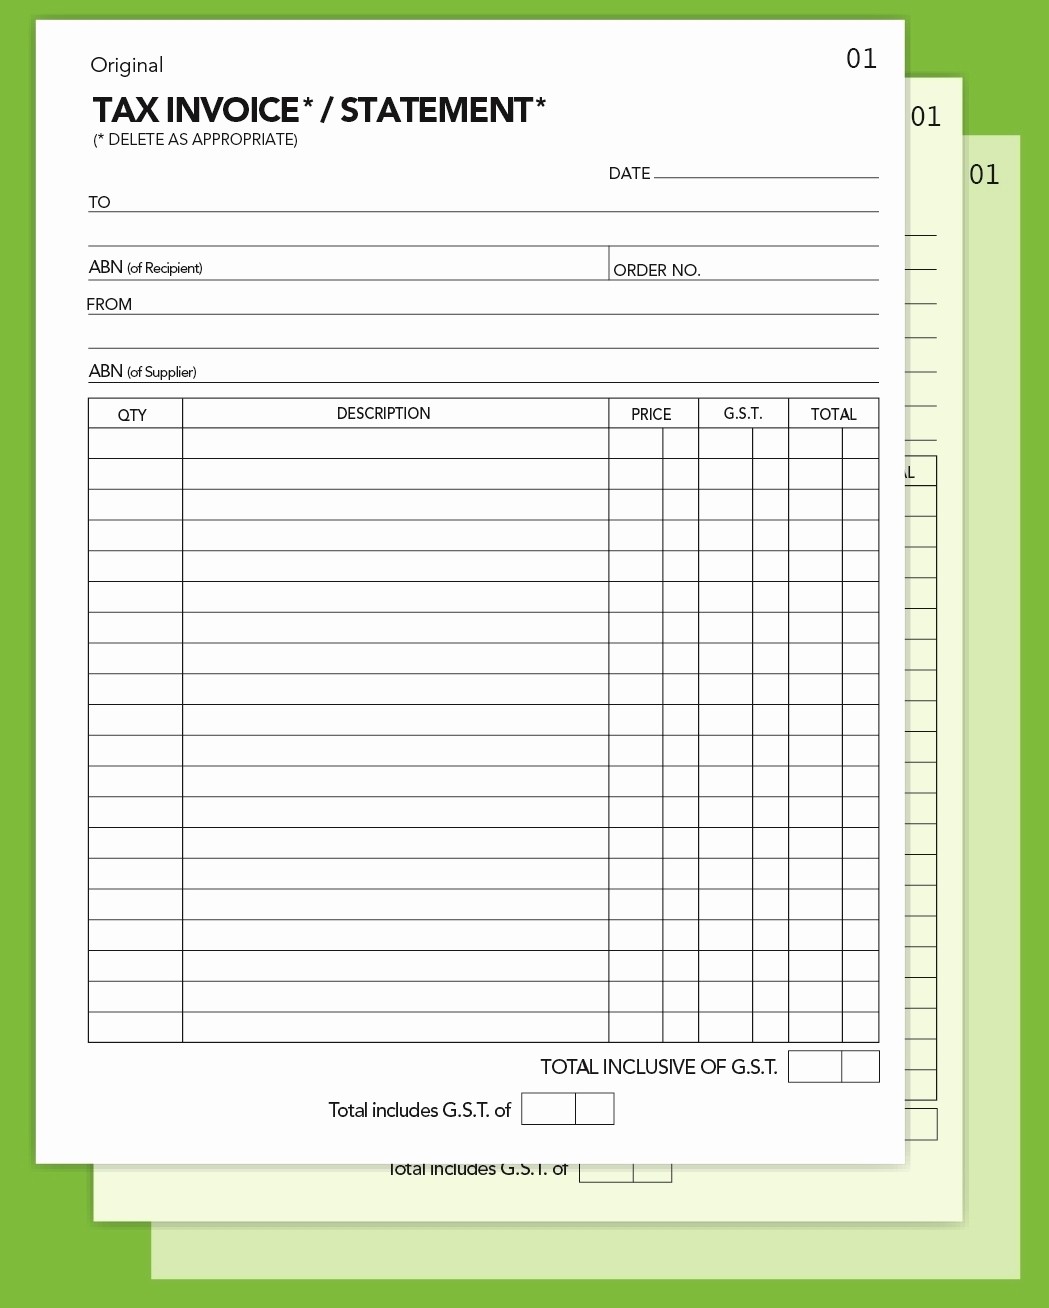 Statement Of Invoices Template Free Lovely Tax Invoice Statement Template Invoice Template Ideas